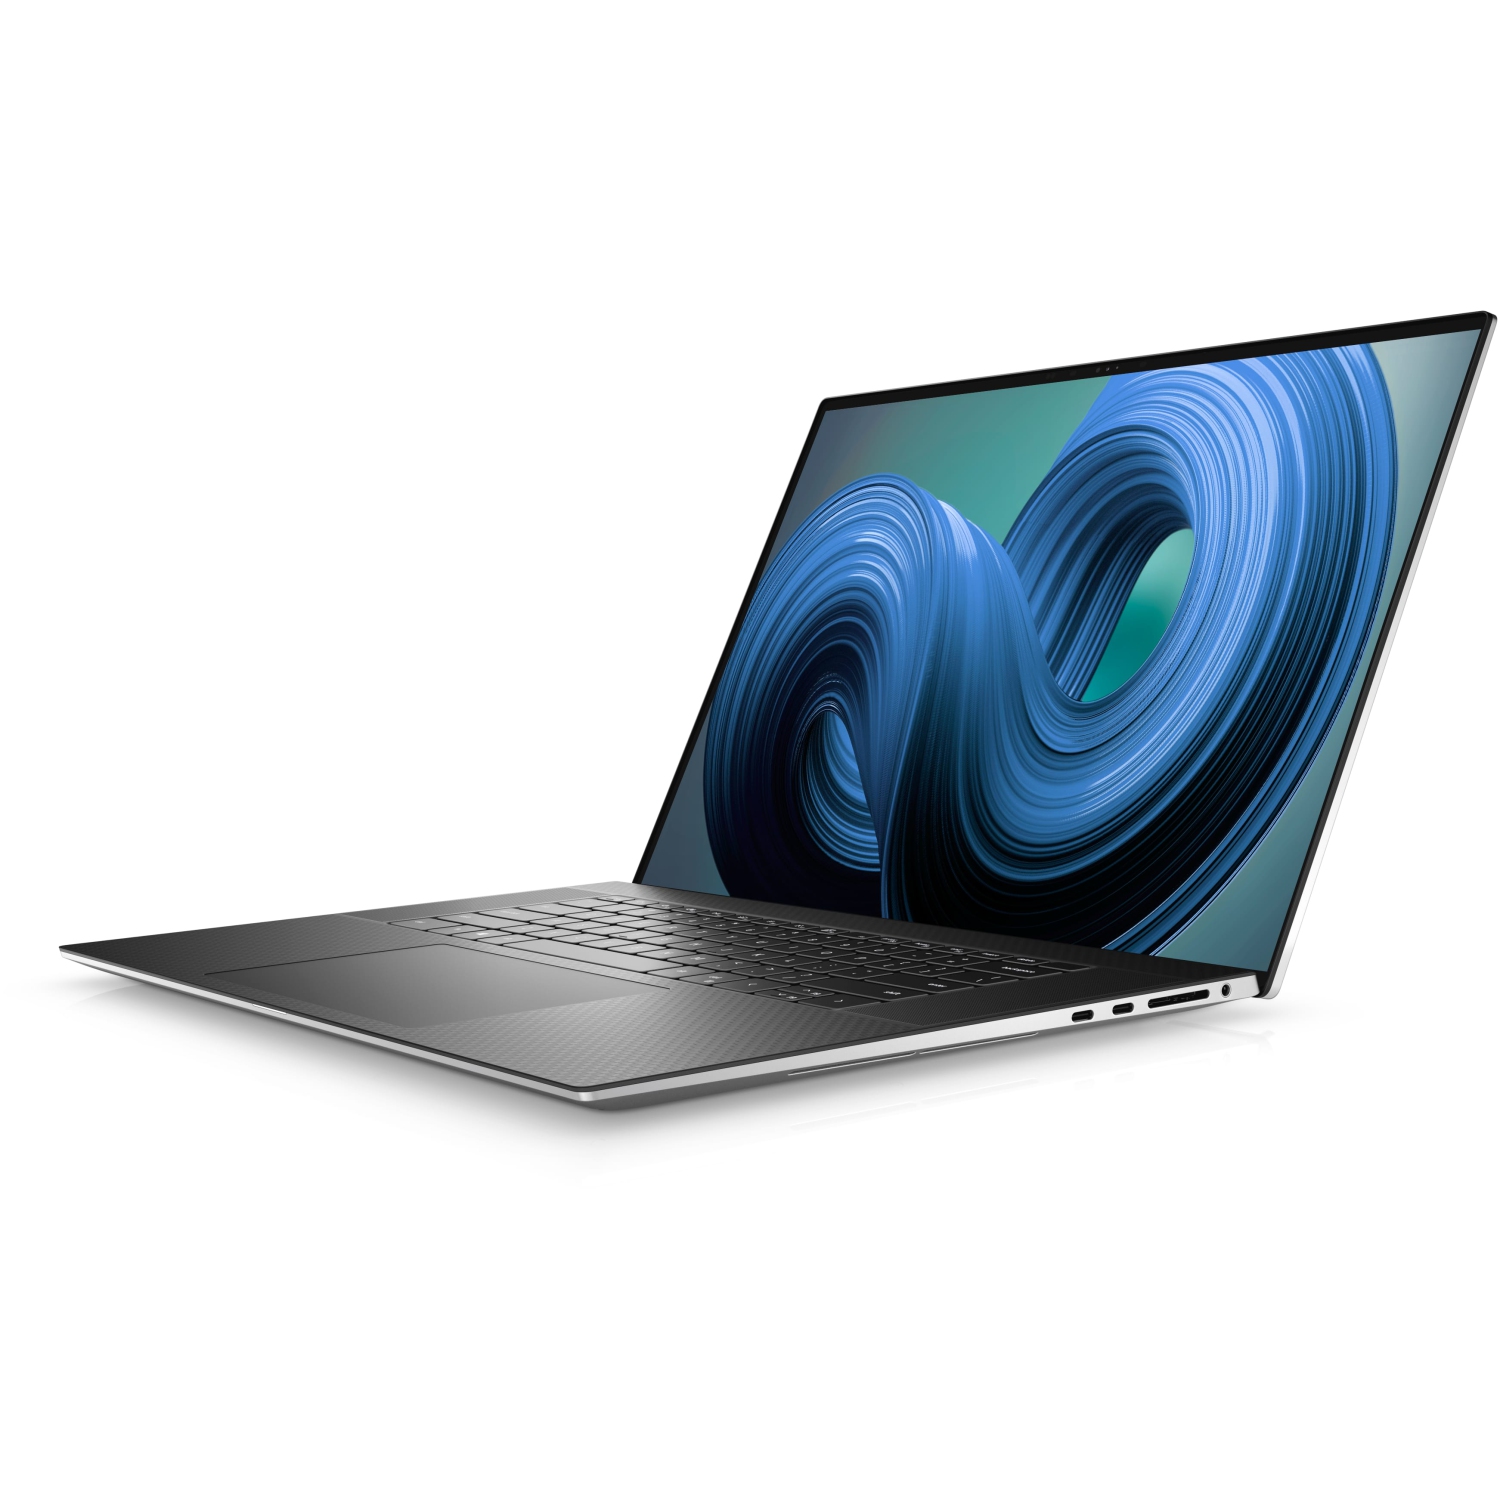 Refurbished (Excellent) – Dell XPS 9720 Laptop (2022) | 17" 4K Touch | Core i7 - 8TB SSD - 32GB RAM - RTX 3050 | 14 Cores @ 4.7 GHz - 12th Gen CPU